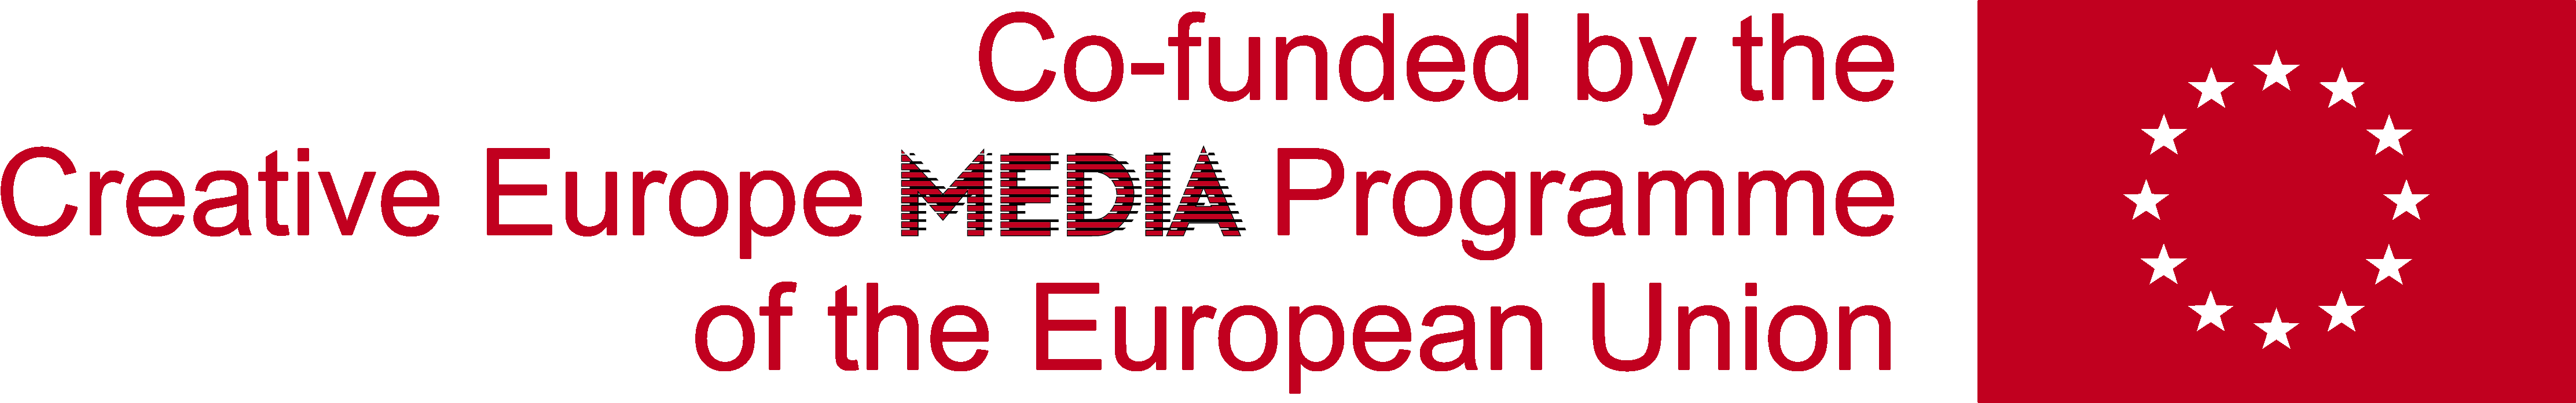 Co-funded by Creative Europe Media Programme of the European Union